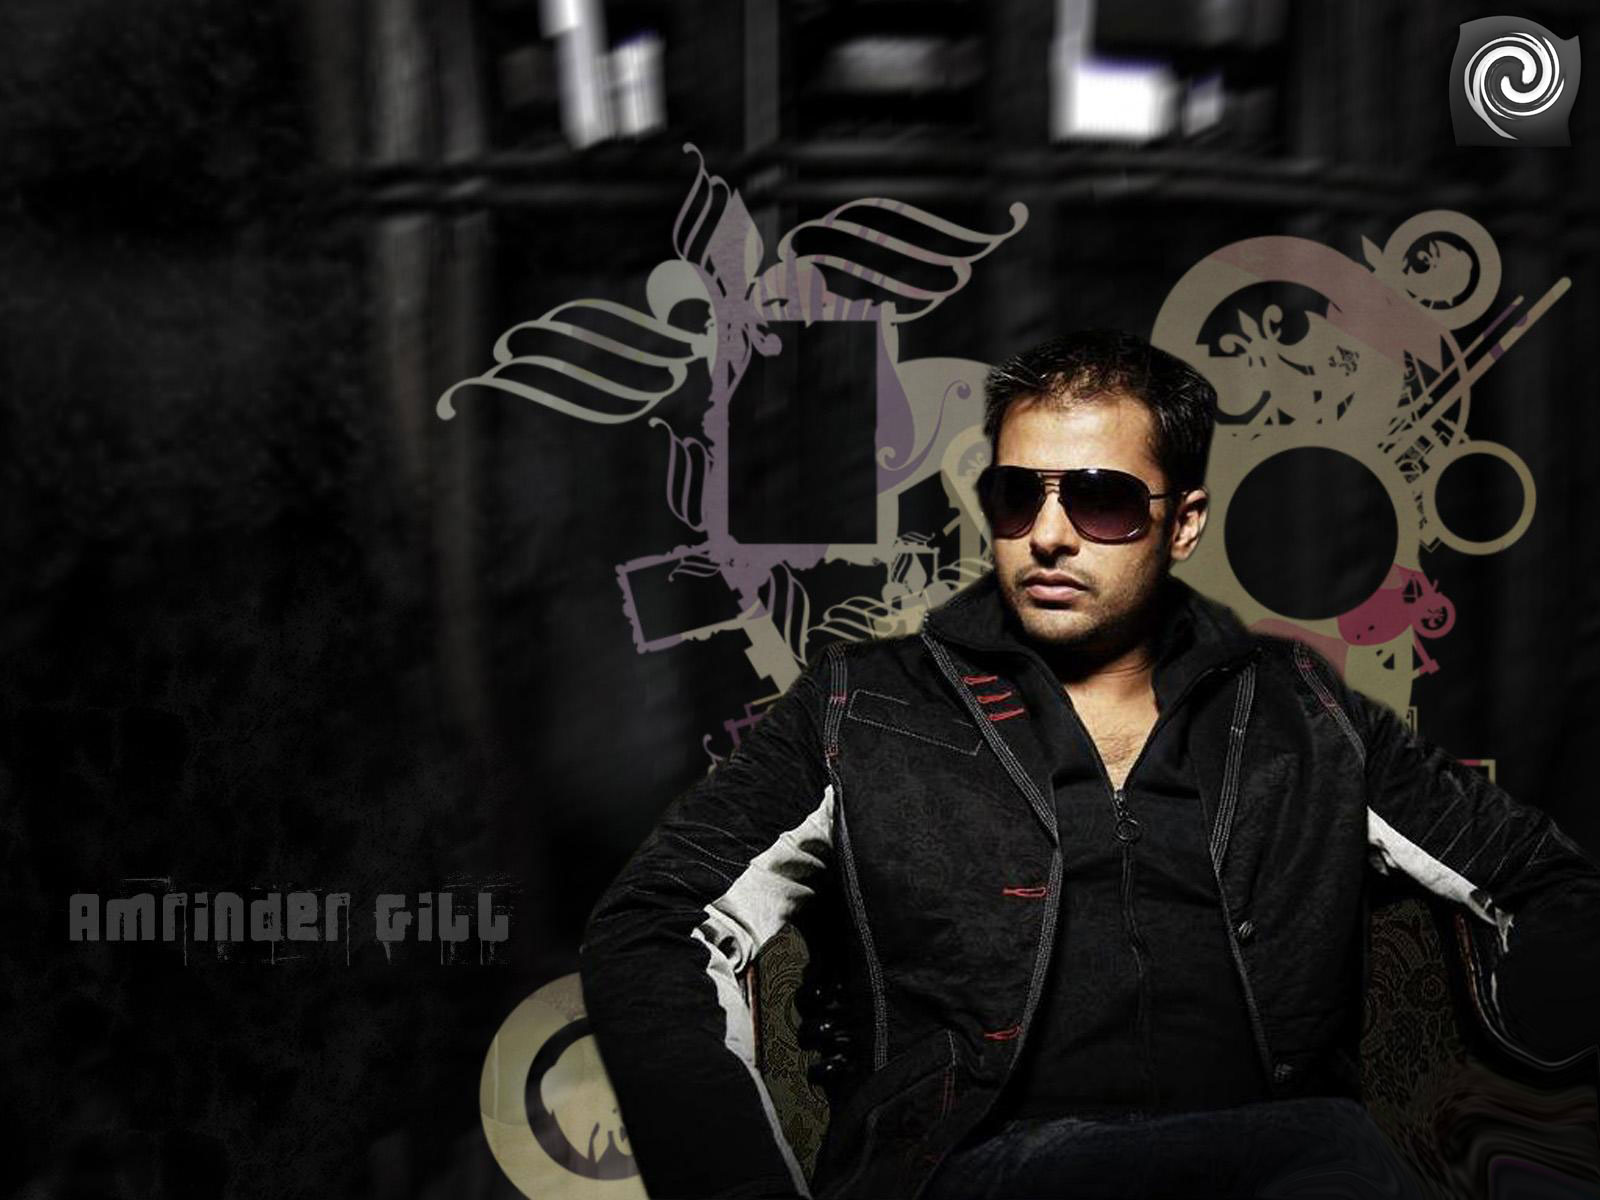 amrinder gill s photo in amrinder gill in new style in wallpaper